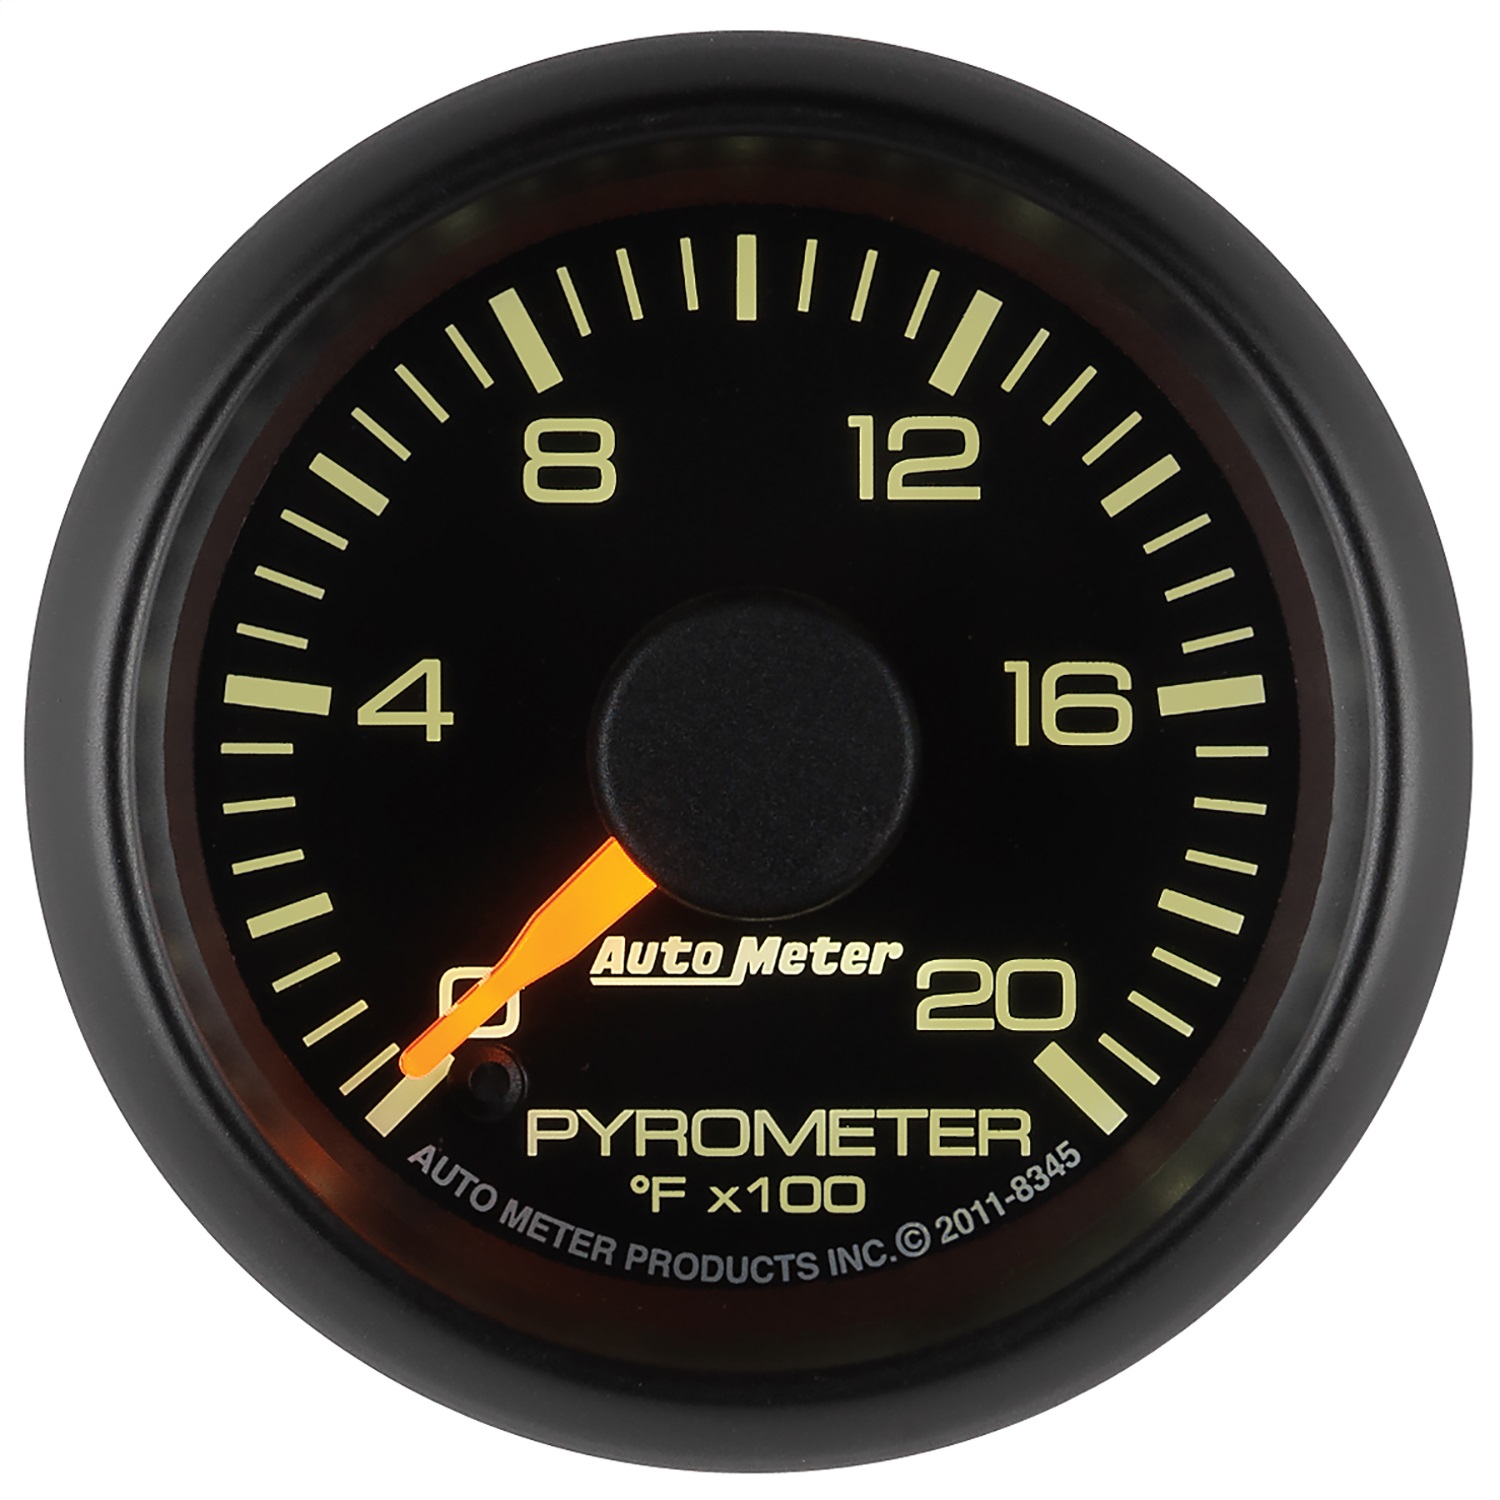 AutoMeter 8345 Chevy Factory Match Electric Pyrometer Gauge Kit